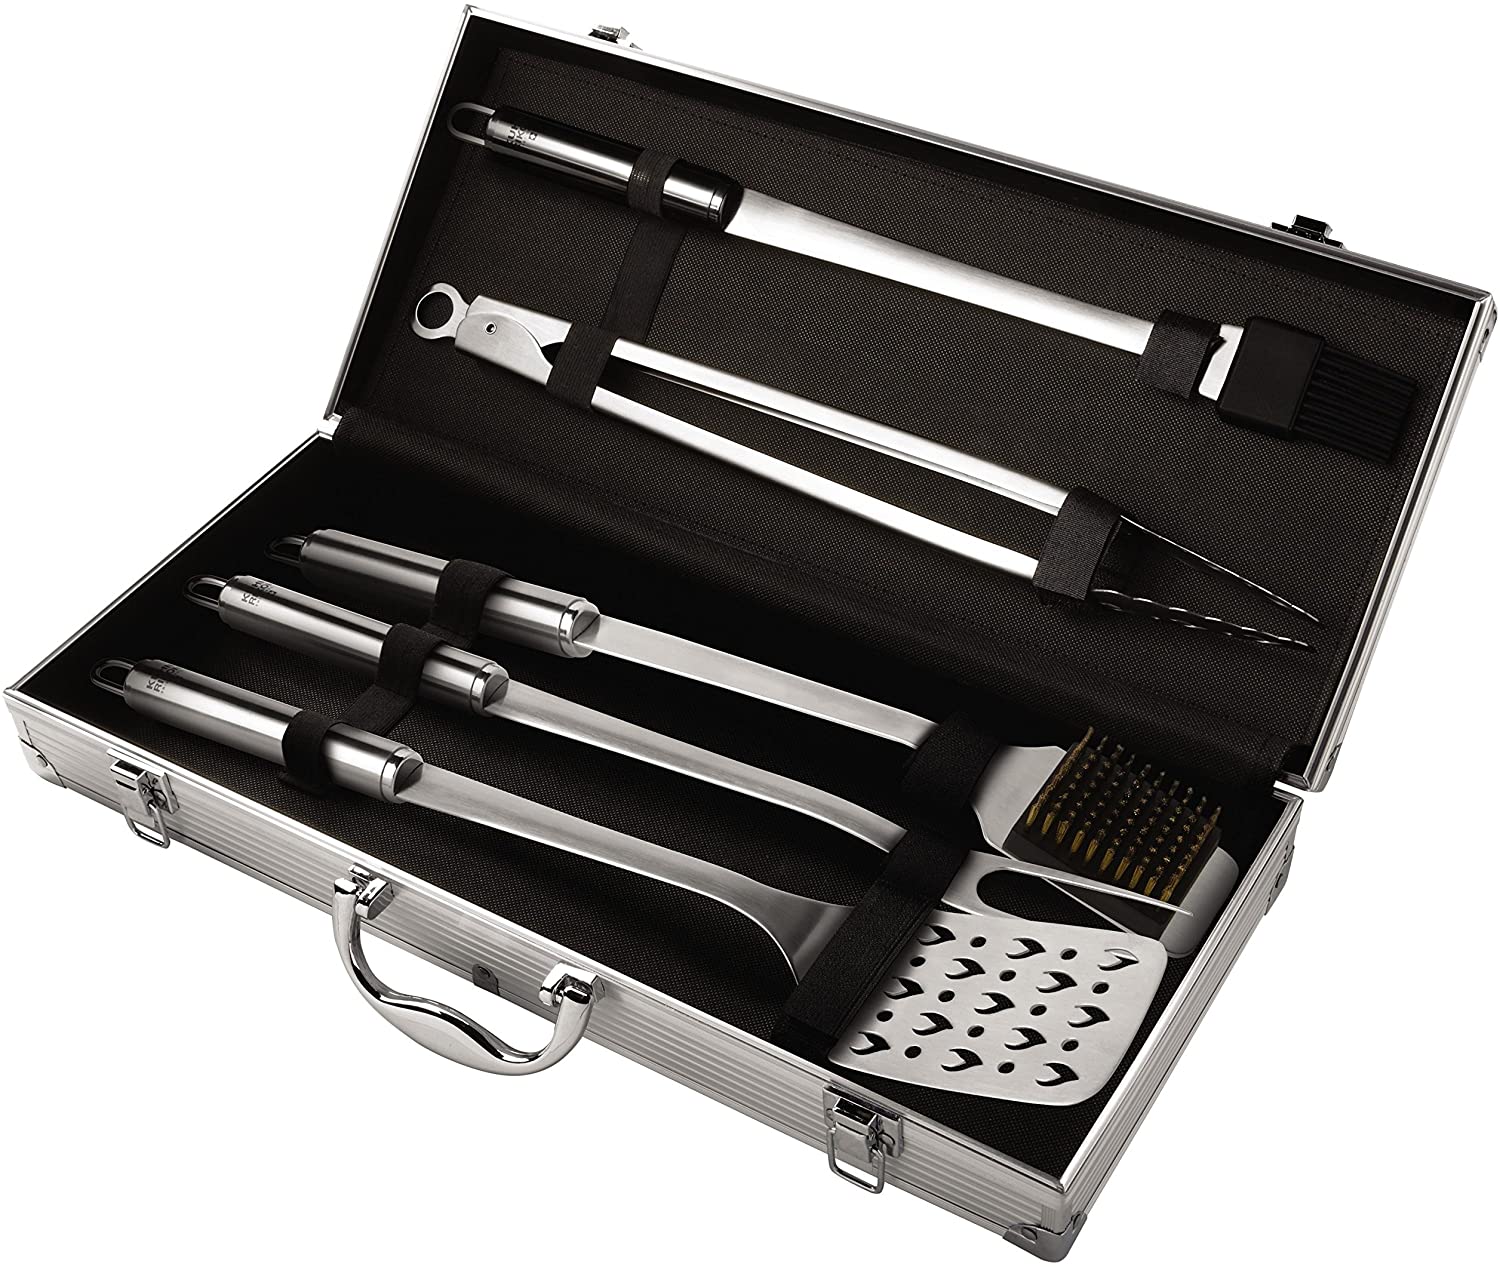 Kuhn Rikon 27915 BBQ Set with Case, Stainless Steel, Silver, 4 x 4 x 15 cm/5 Units